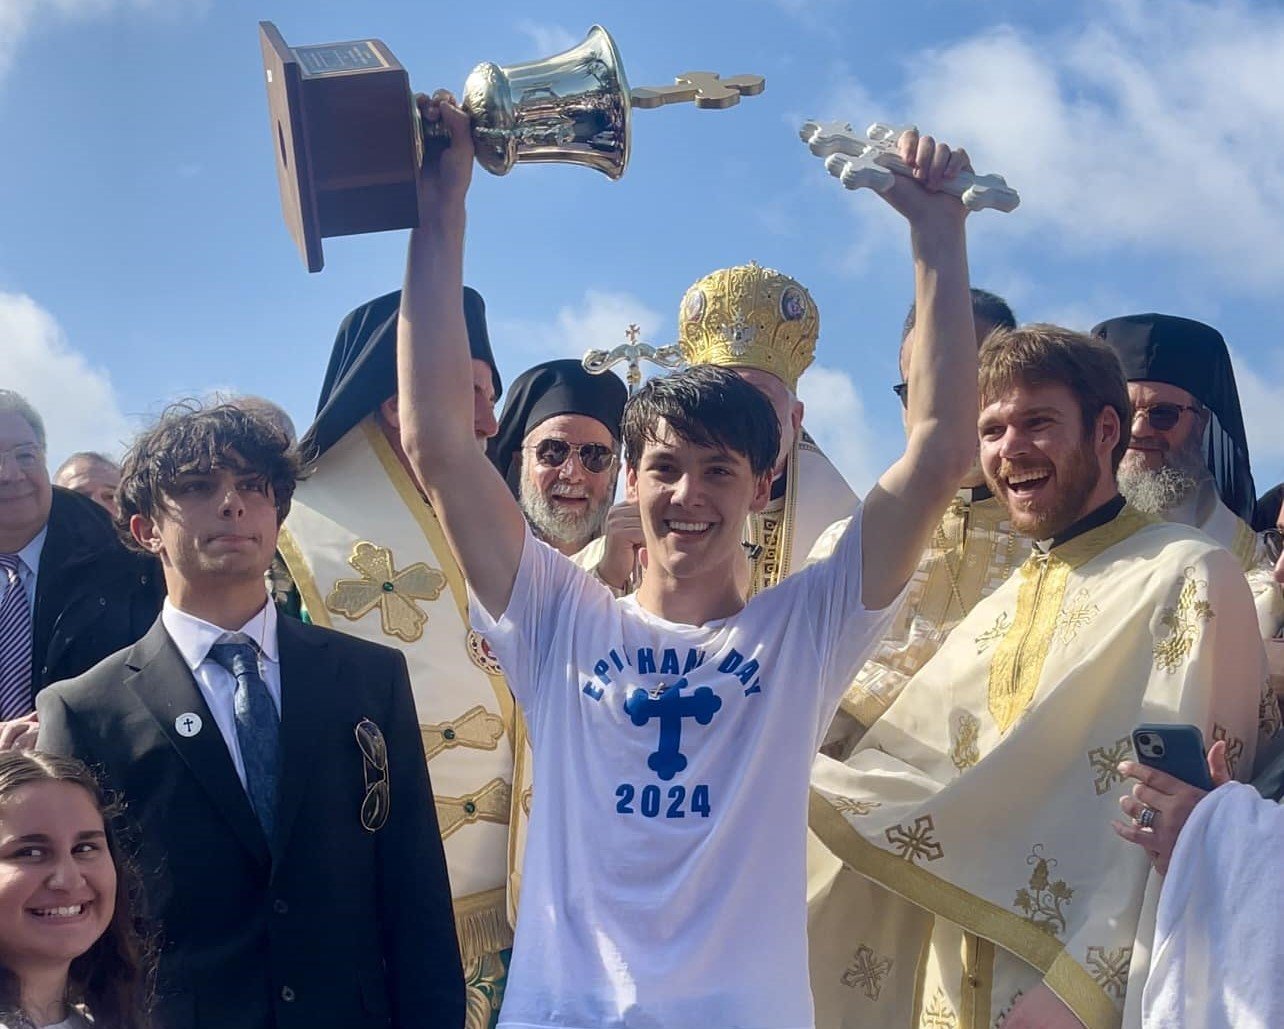 Seventeen-year-old John Hittos was this year's winner in retrieving the Holy Cross in the Tarpon Springs annual Epiphany celebration